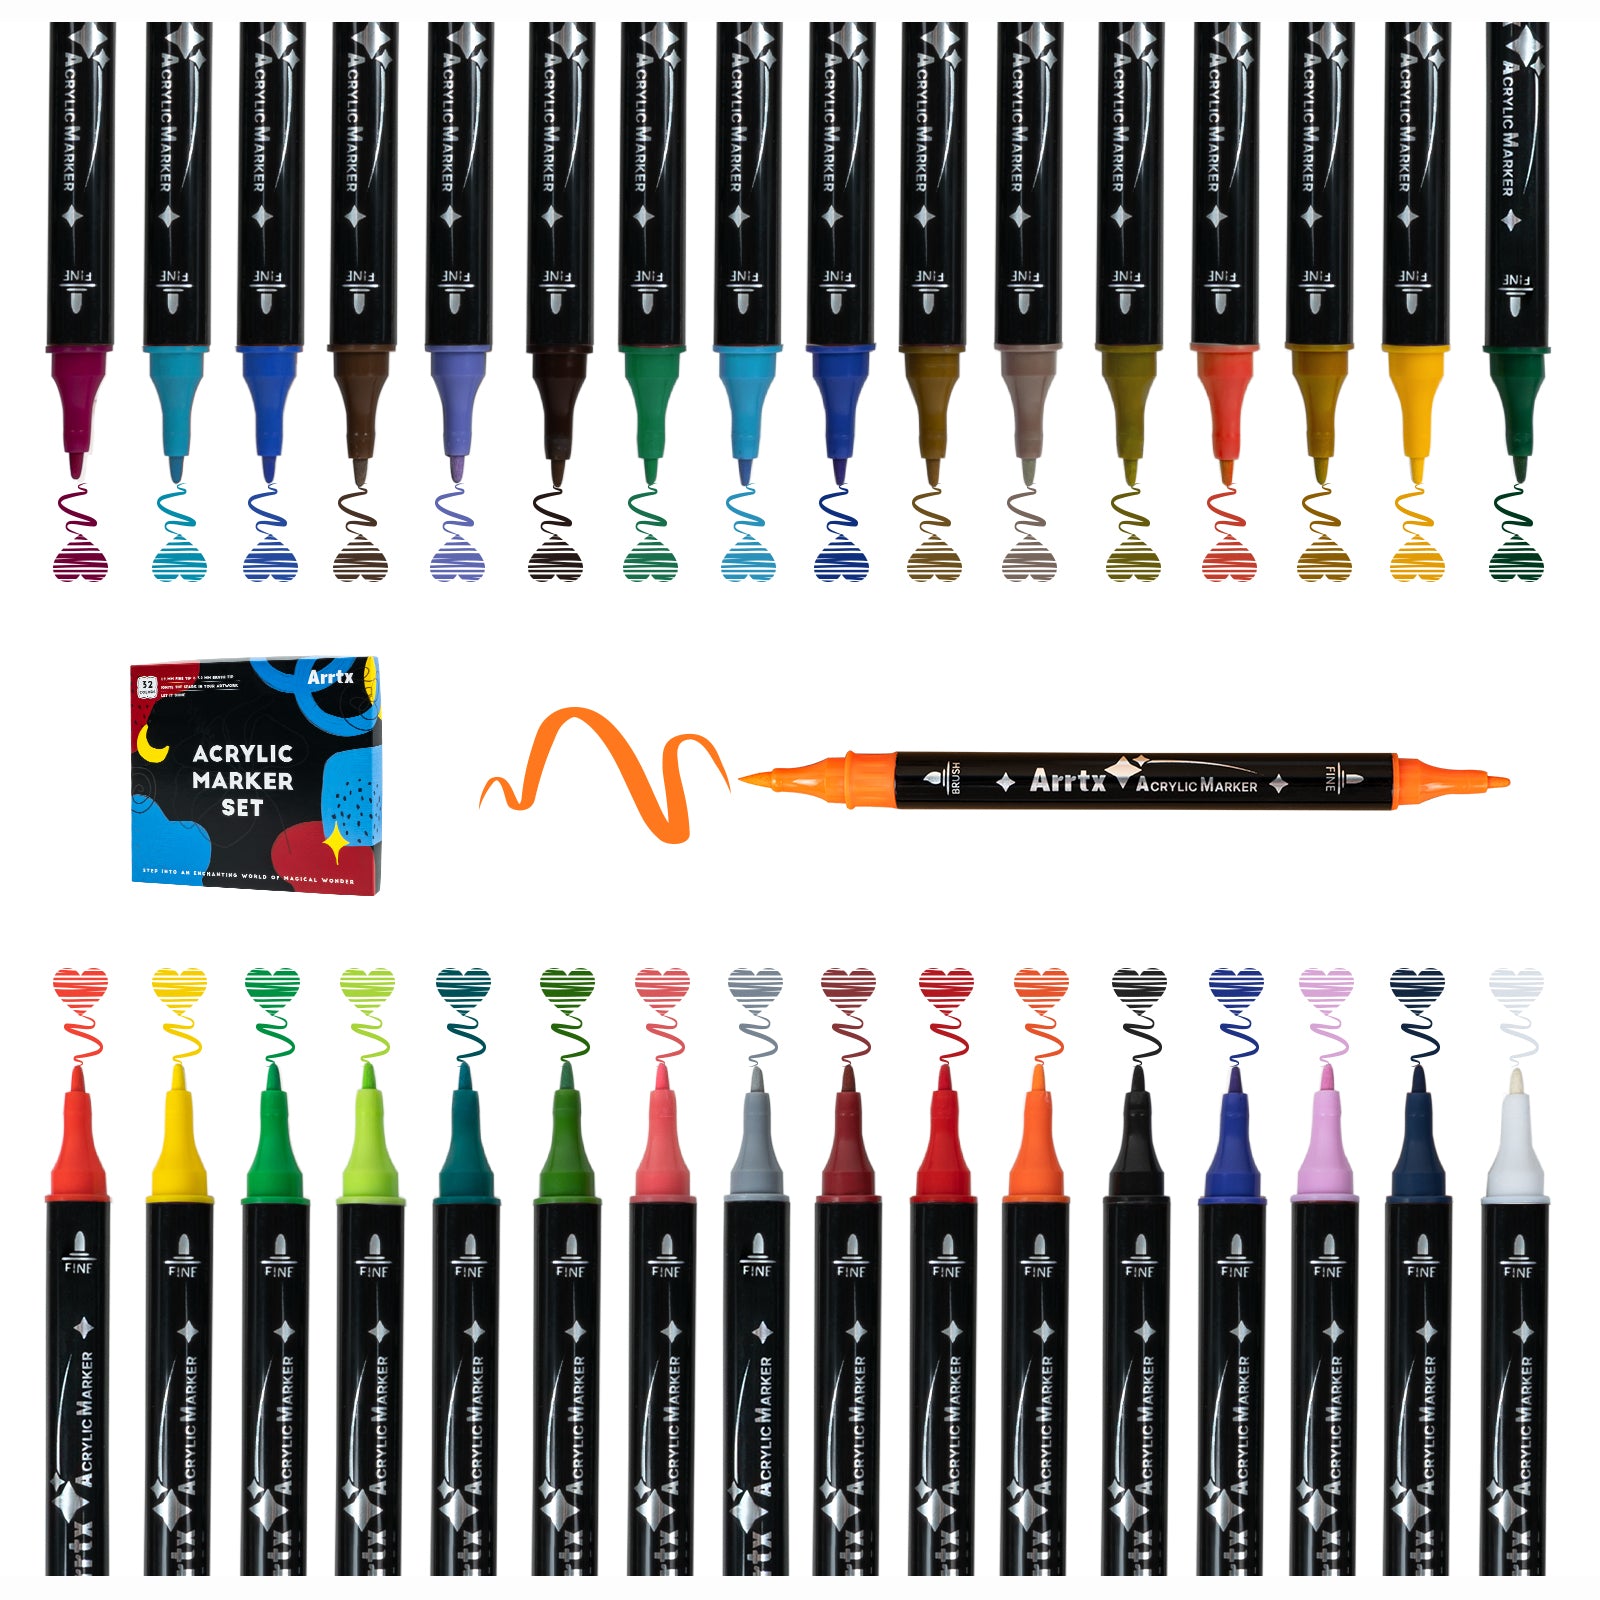 ARRTX Acrylic Markers Review  Metallic and Saturated Sets 